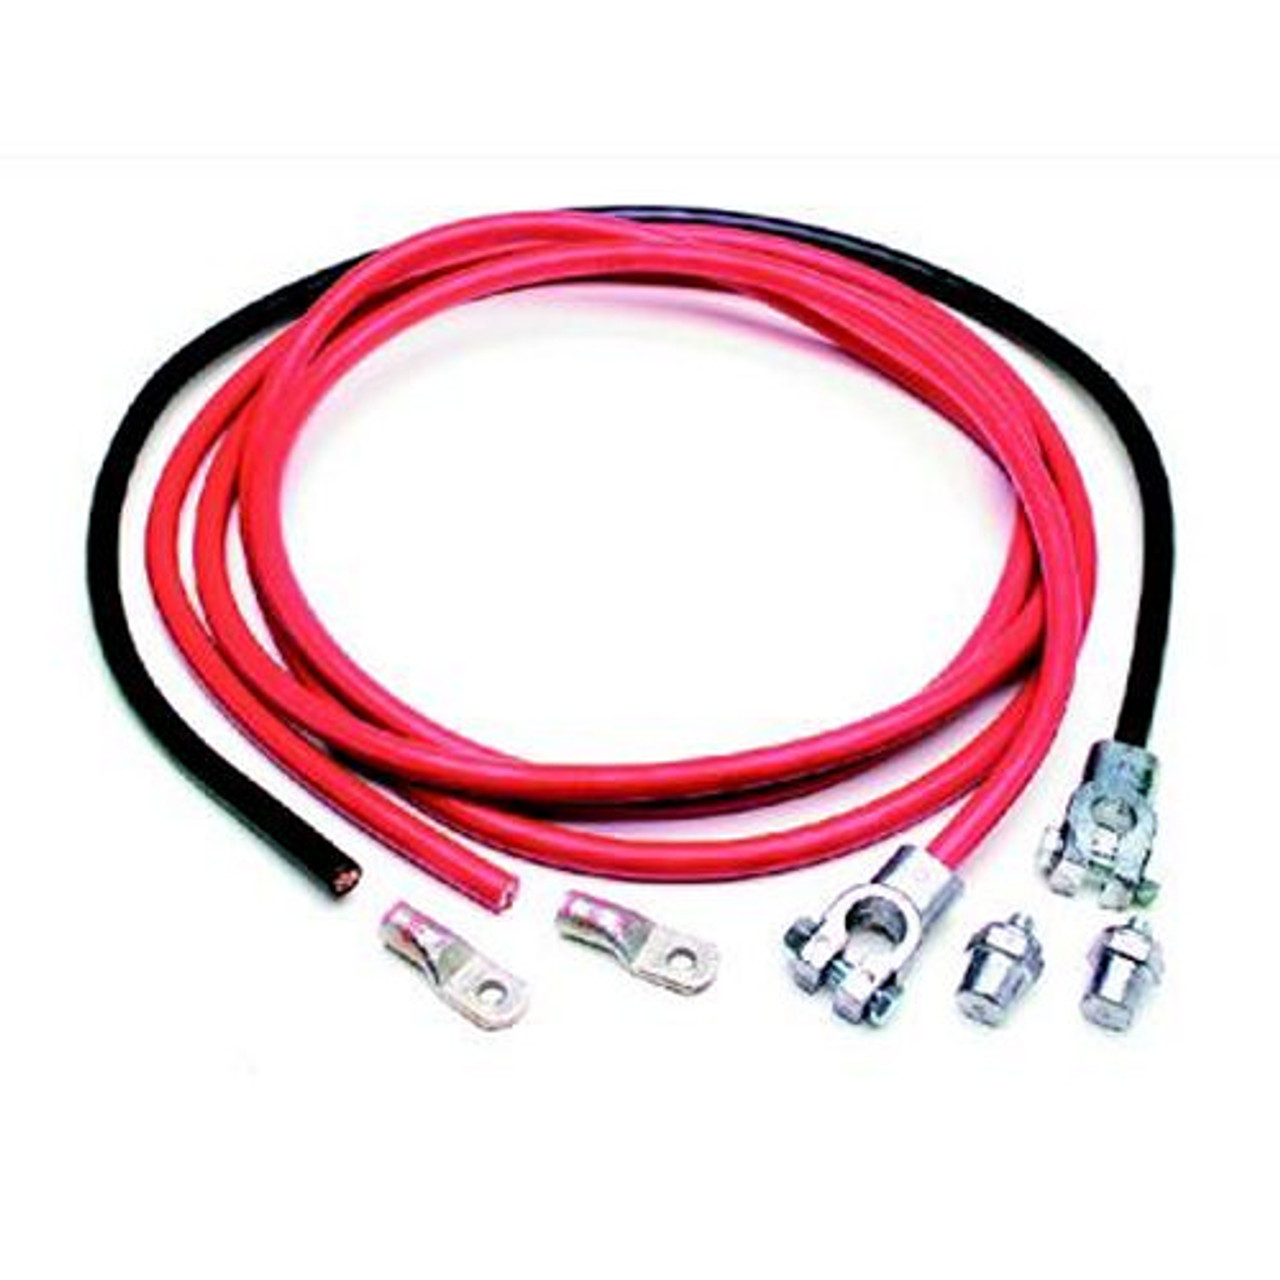 Painless Battery Cable Kit 15'Red 3'Black - PWI40100